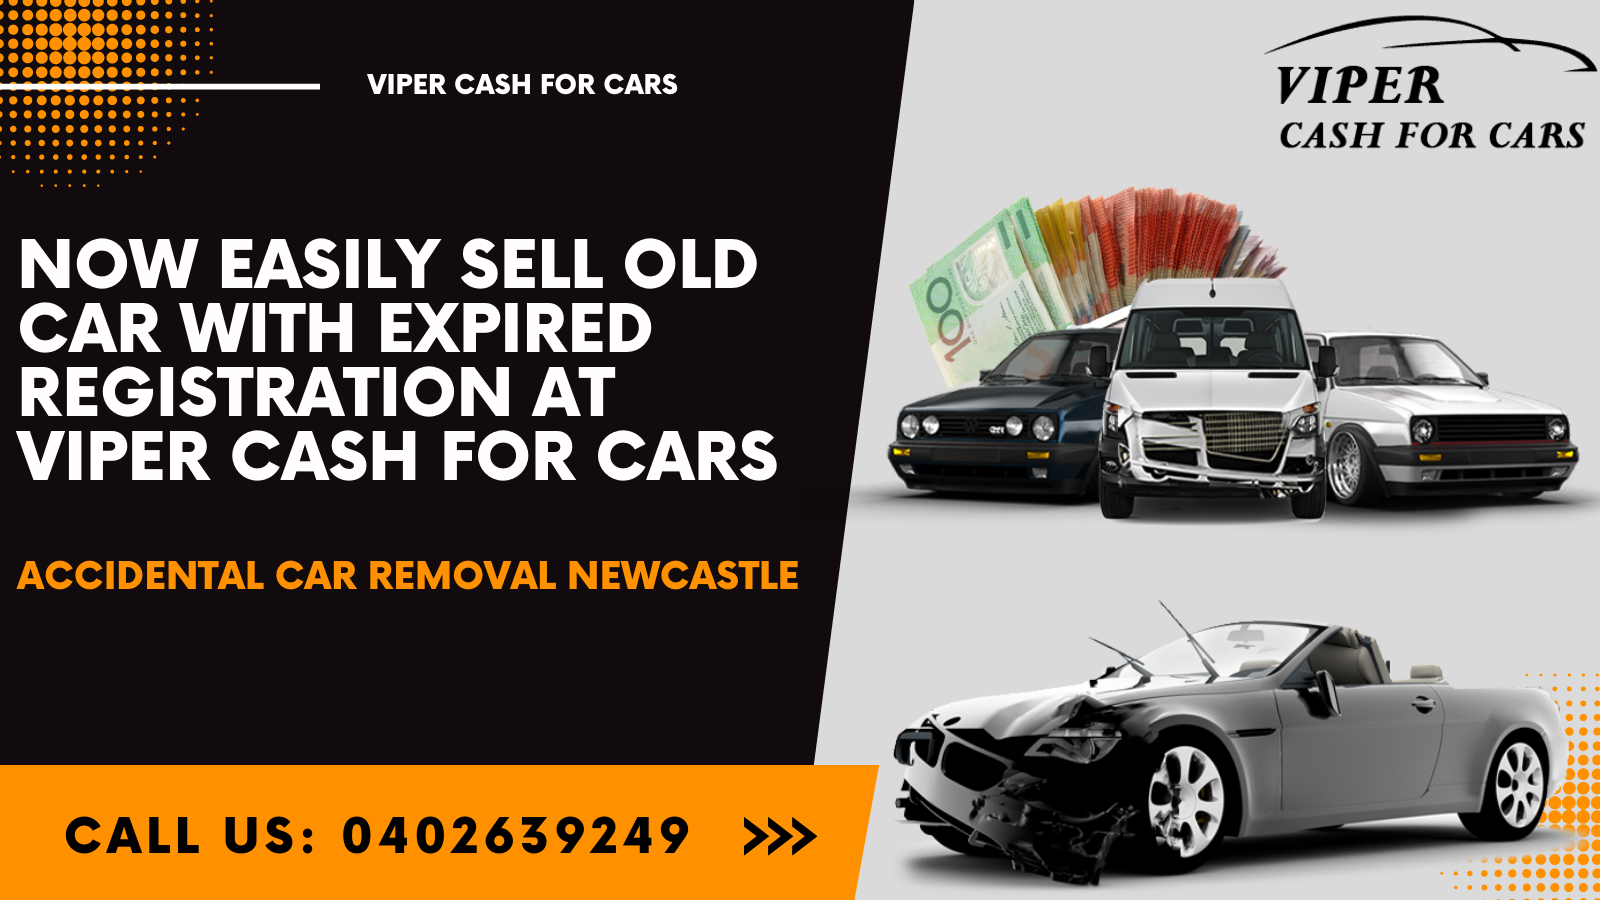 Now Easily Sell Old Car With Expired Registration At Viper Cash For Cars